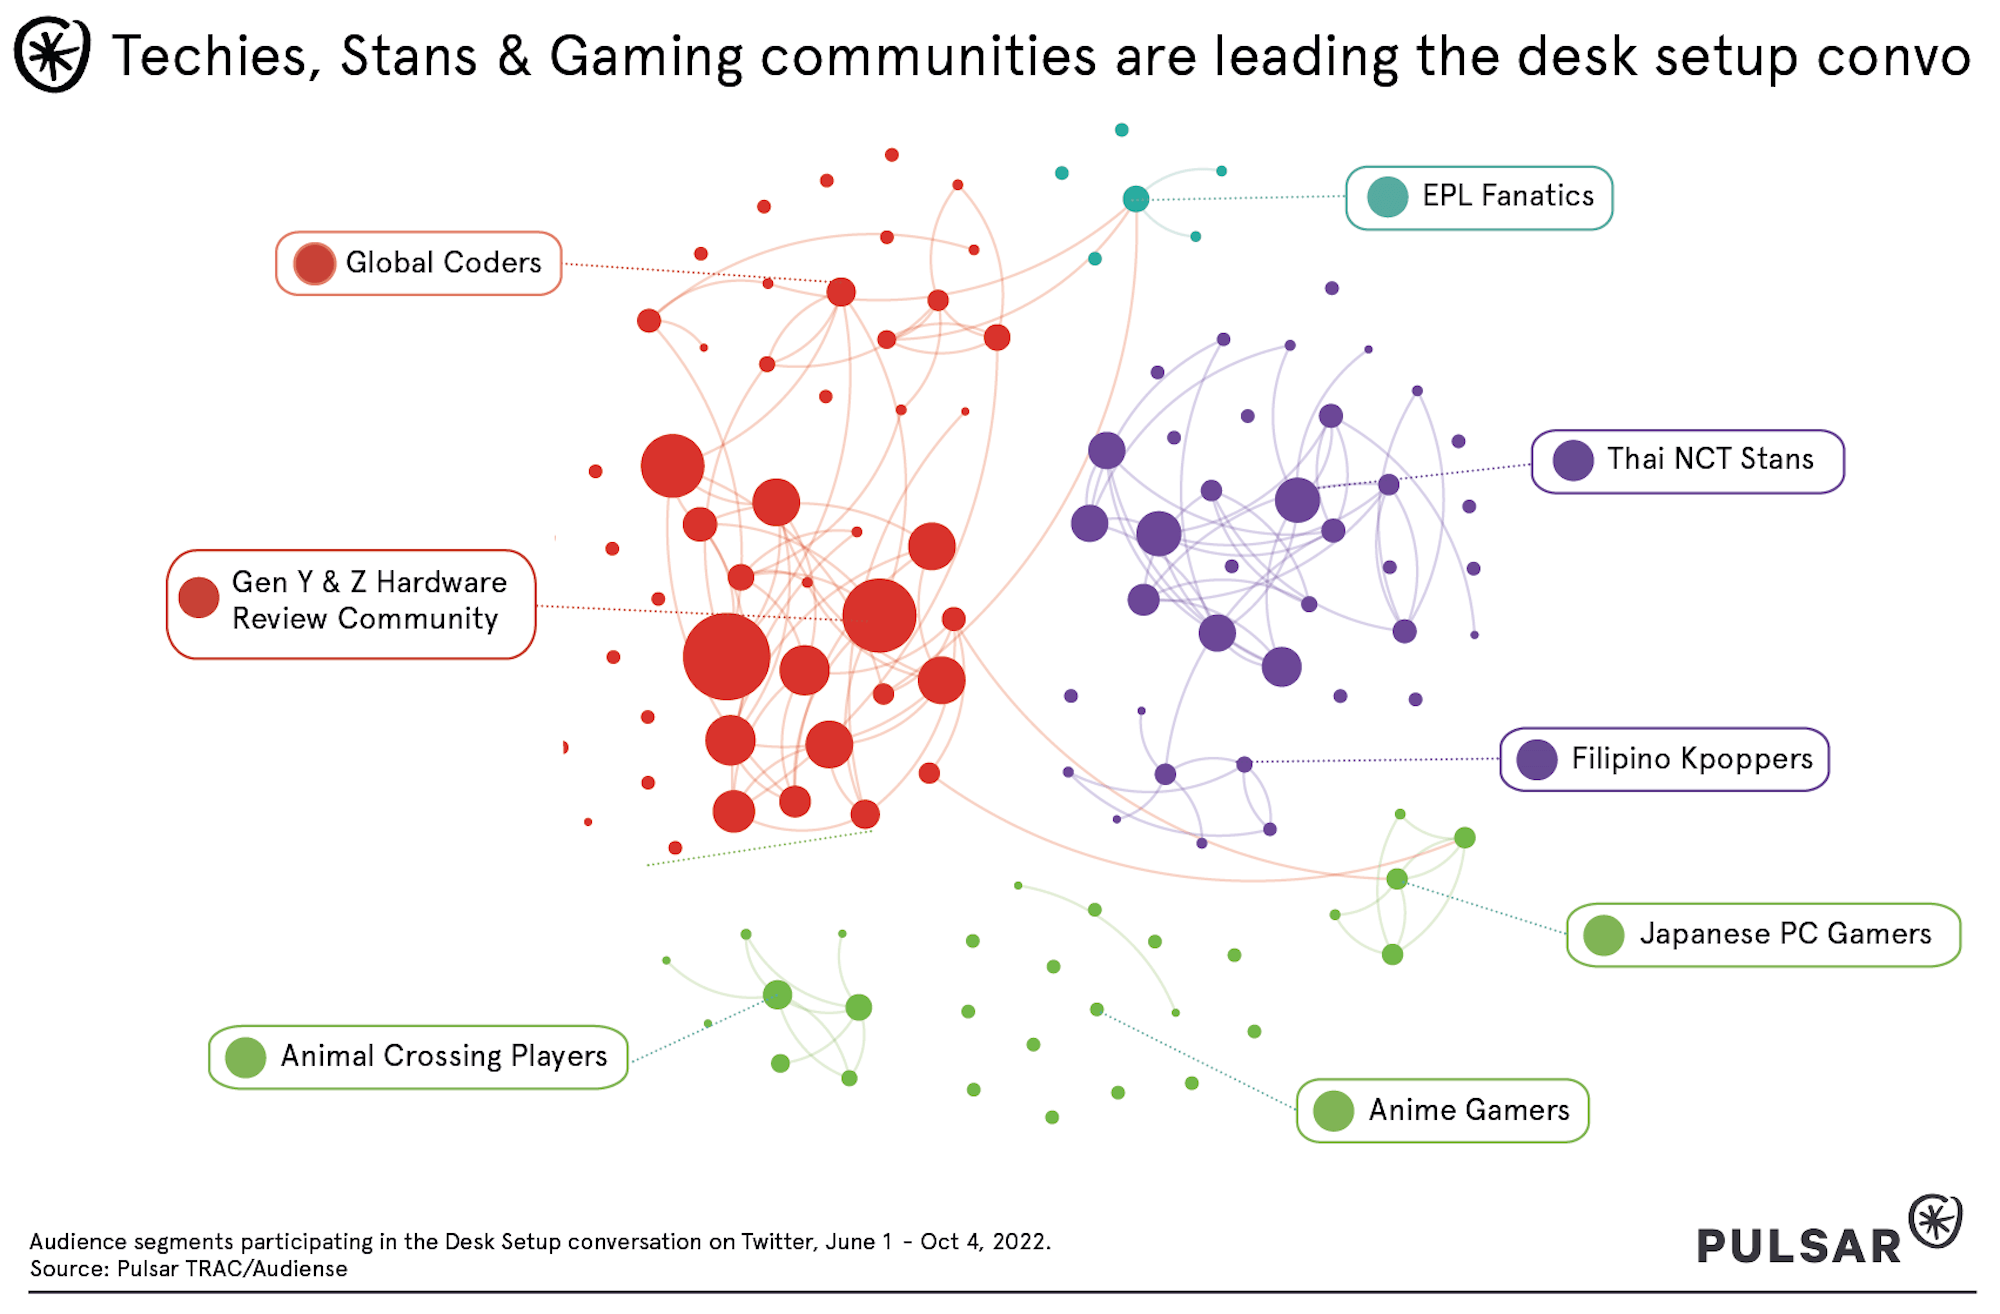 Techies, Stans & Gaming communities are leading the desk setup convo